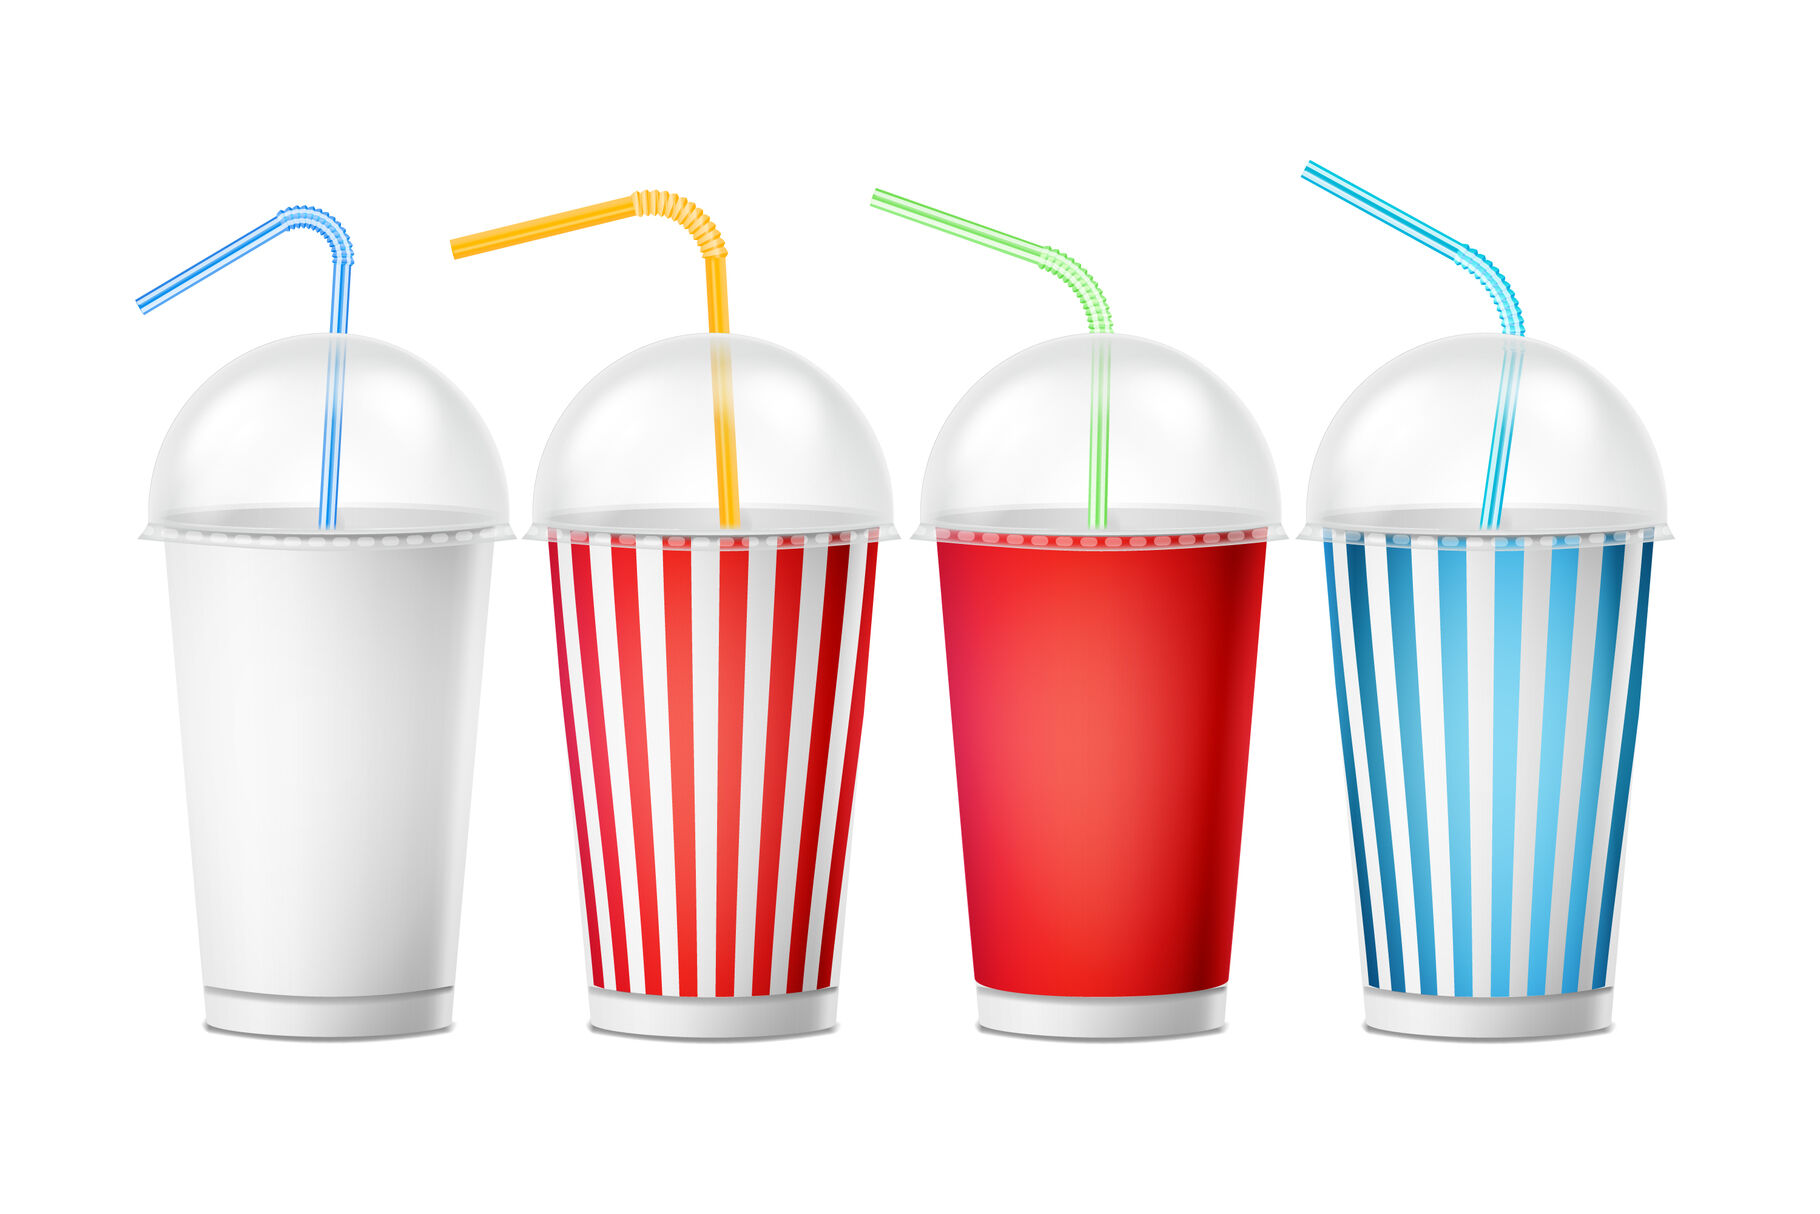 https://media1.thehungryjpeg.com/thumbs2/ori_3748727_5e0dpoup708ouq76cdili39ddouv9ll0jobjz15s_soda-cup-template-vector-3d-realistic-paper-disposable-cups-set-for-beverages-with-drinking-straw-isolated-on-white-background-packaging-illustration.jpg